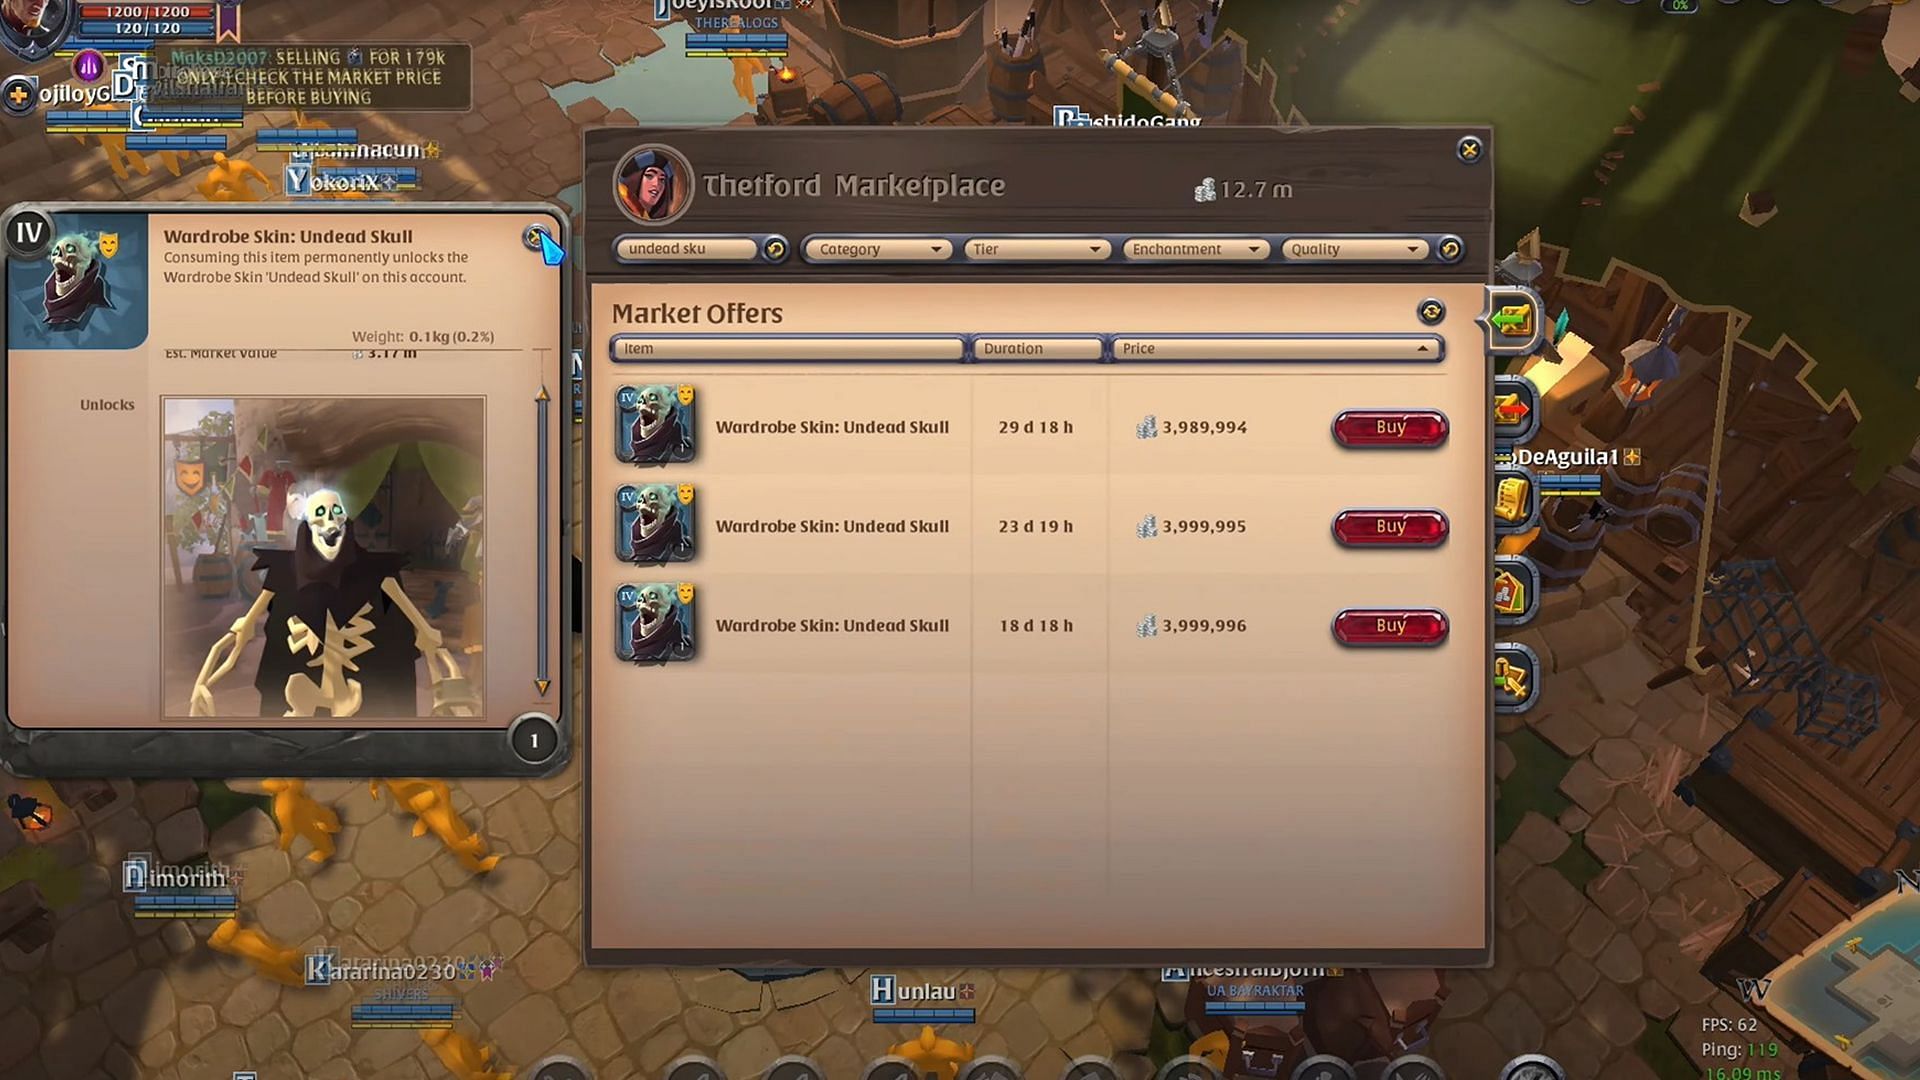 Making a profit from rare items in Albion Online (Image via Sandbox Interactive)